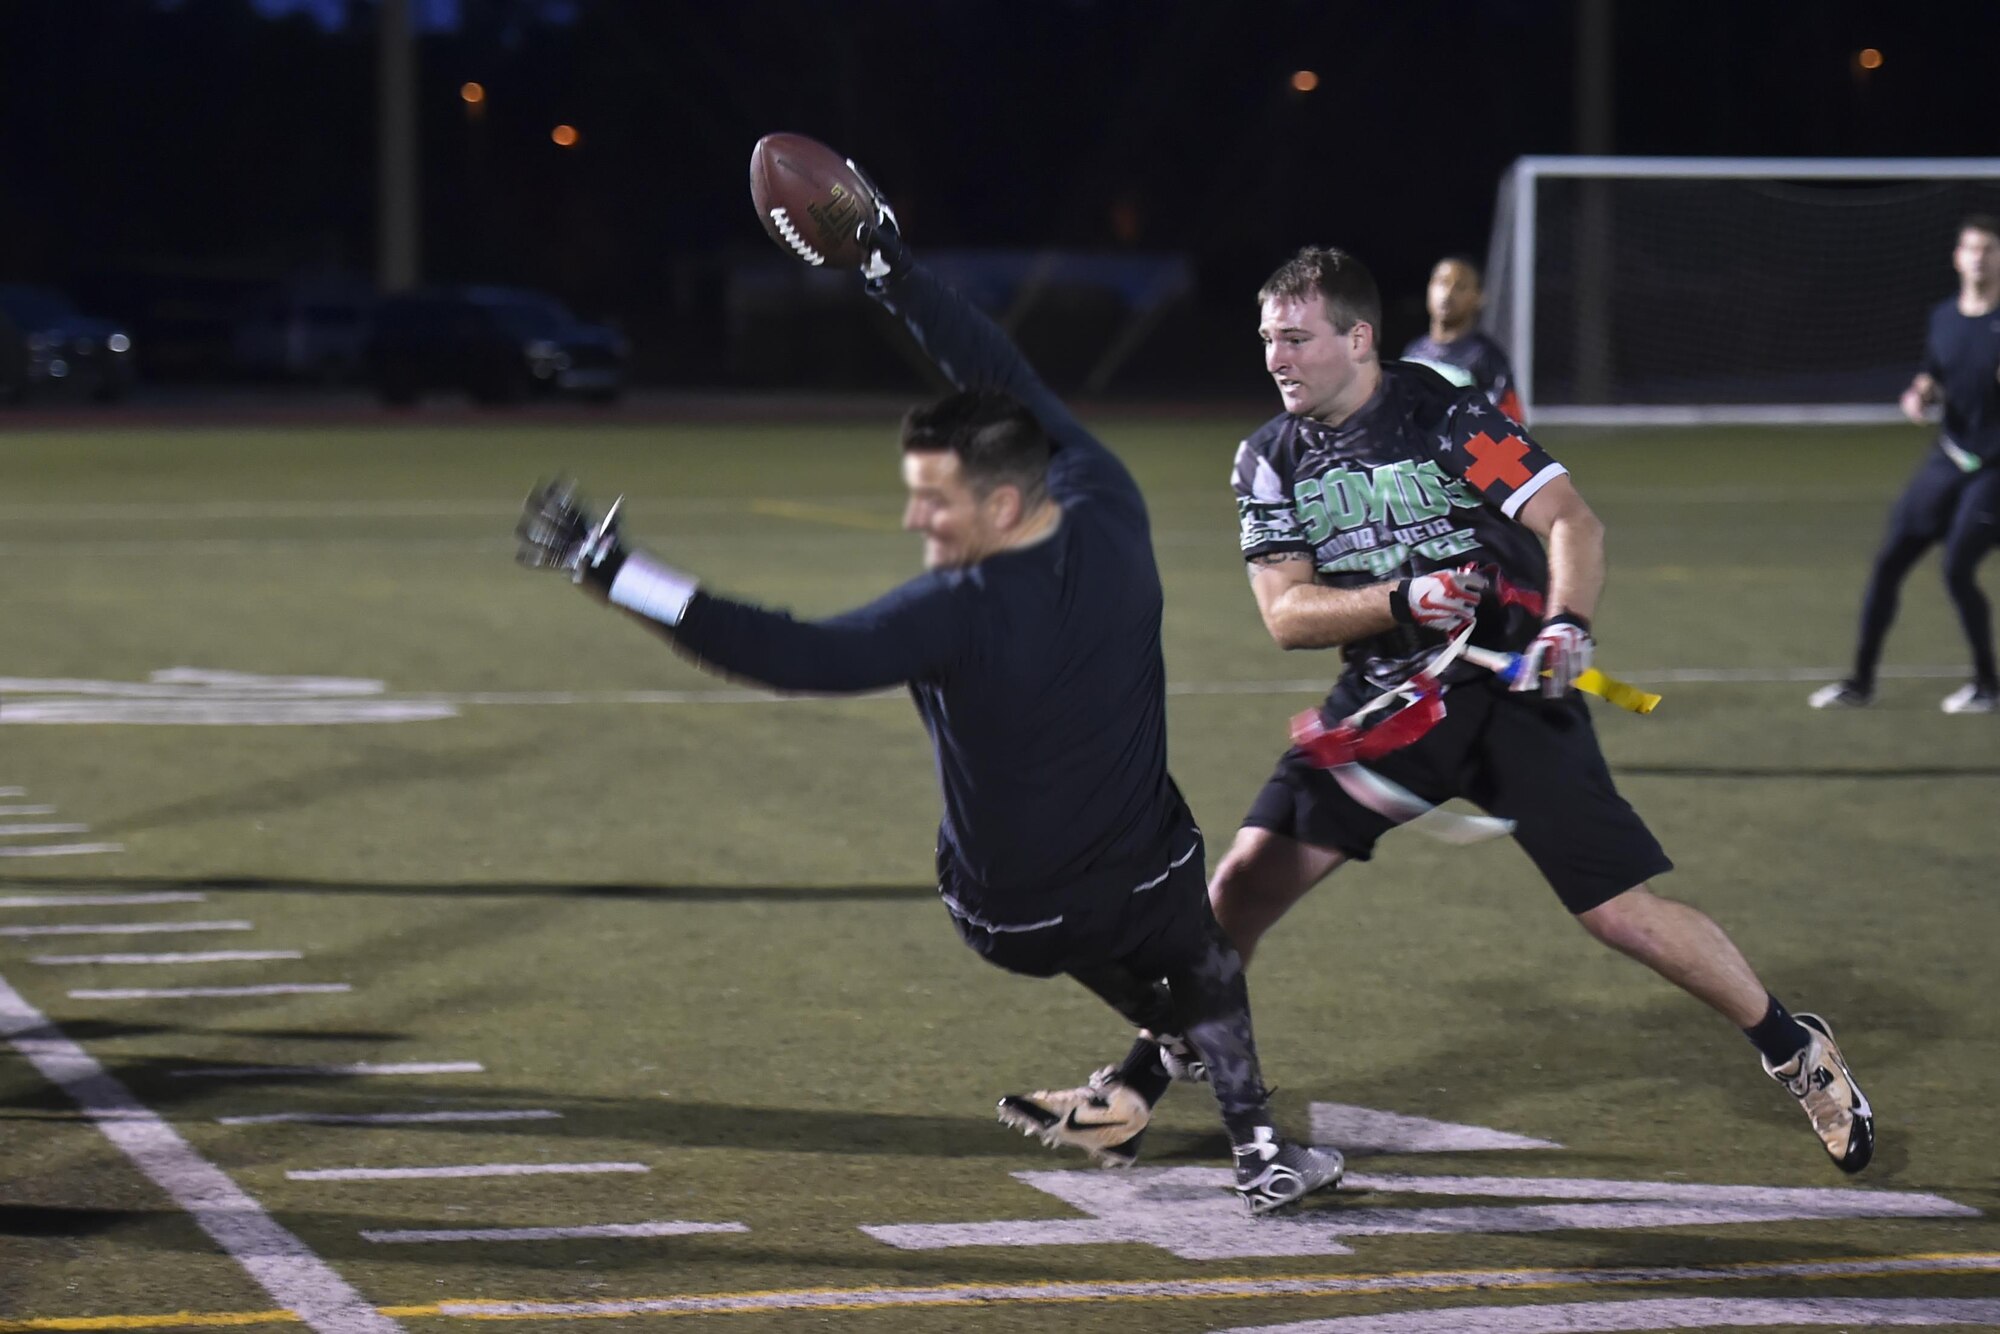 Christopher Mauldin, a defensive player for the 1st Special Operations Medical Group intramural flag football team, pulls the flag of a receiver for the 23rd Special Tactics Training Squadron team during the flag football championship at Hurlburt Field, Fla., Jan. 26, 2017. The 1st SOMDG defeated the 23rd STTS by the score of seven to six. (U.S. Air Force photo by Airman 1st Class Joseph Pick)